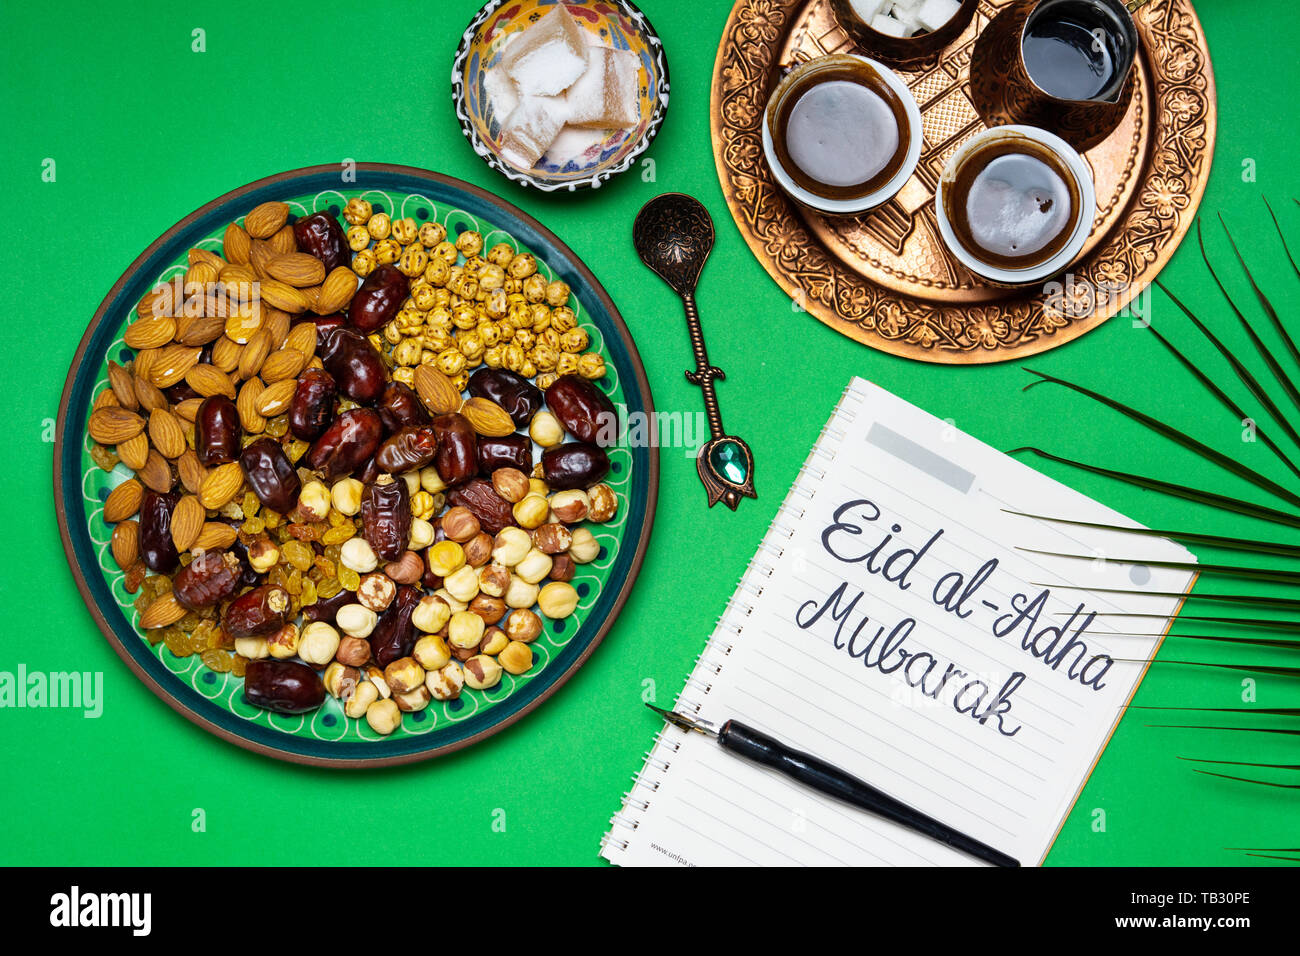 Eid Mubarak note with snacks and coffee on a table Stock Photo